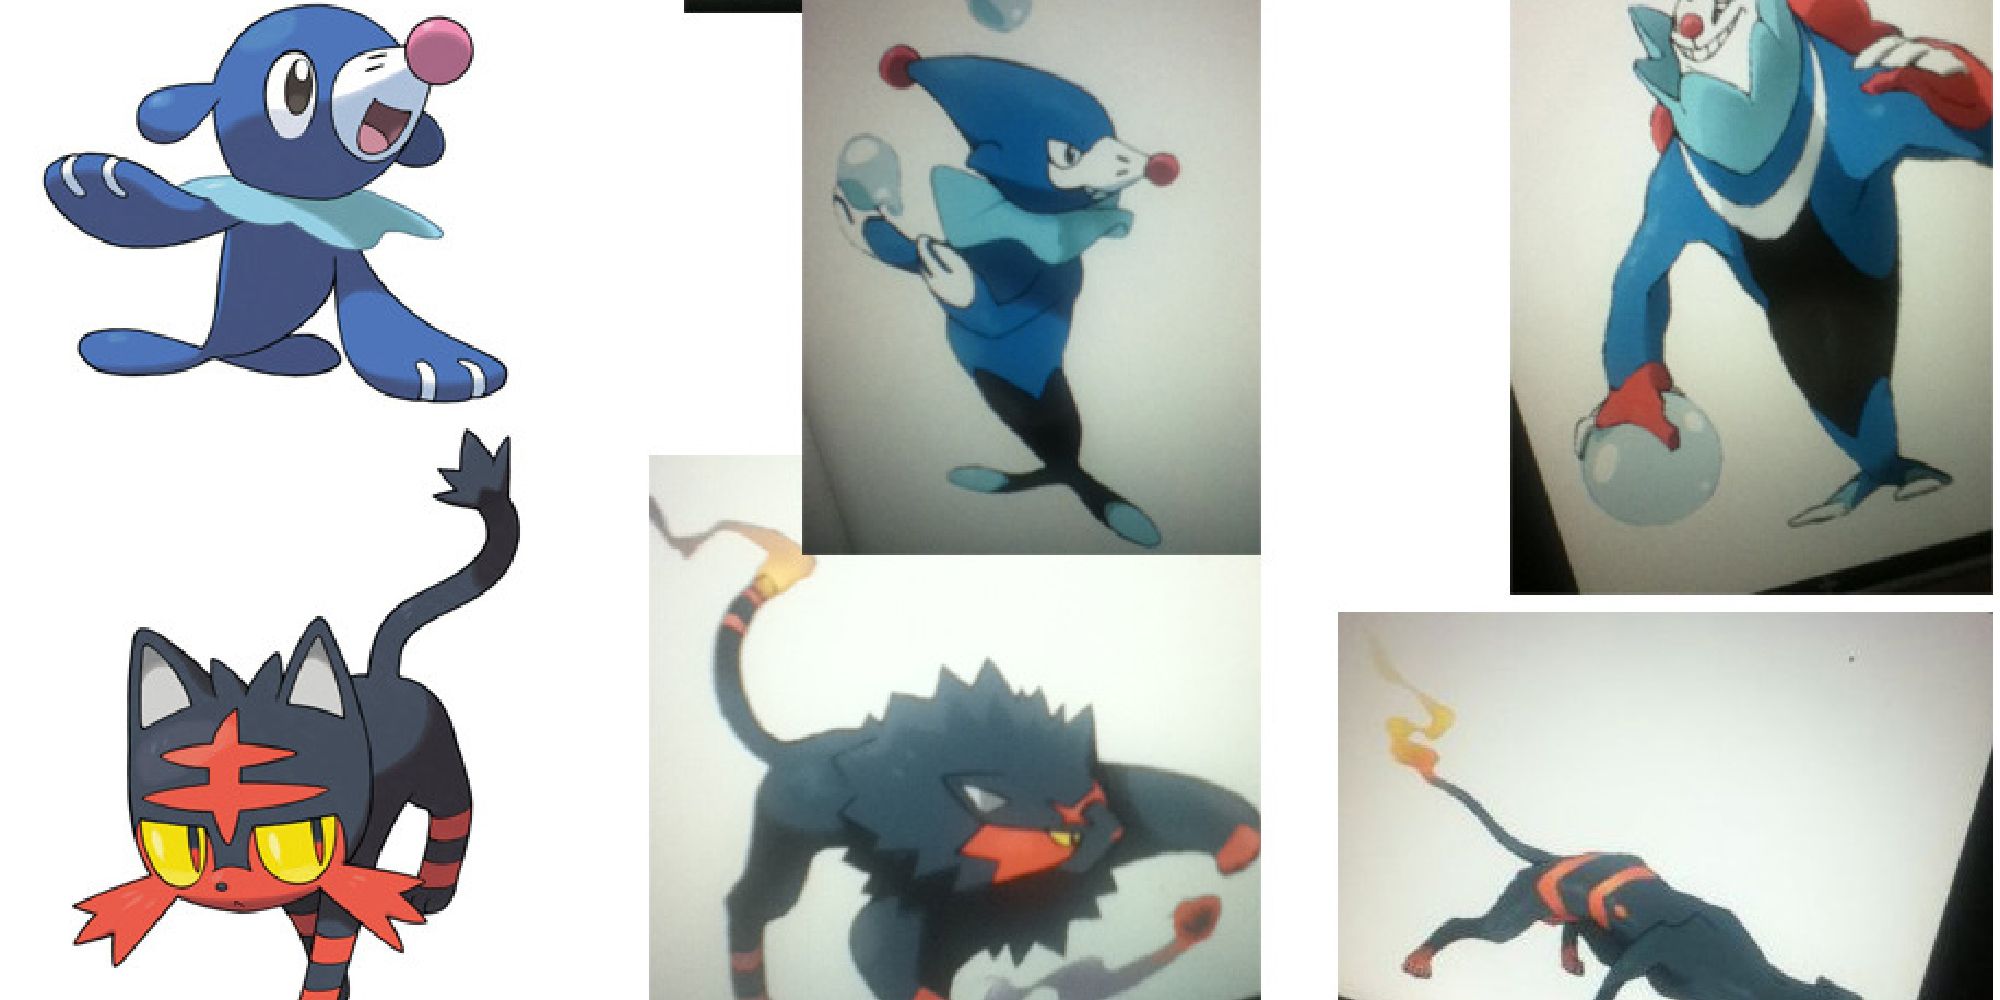 Popplio and Litten's fake starter evolutions, depicting a clown-like seal for Popplio and a slender panther for Litten